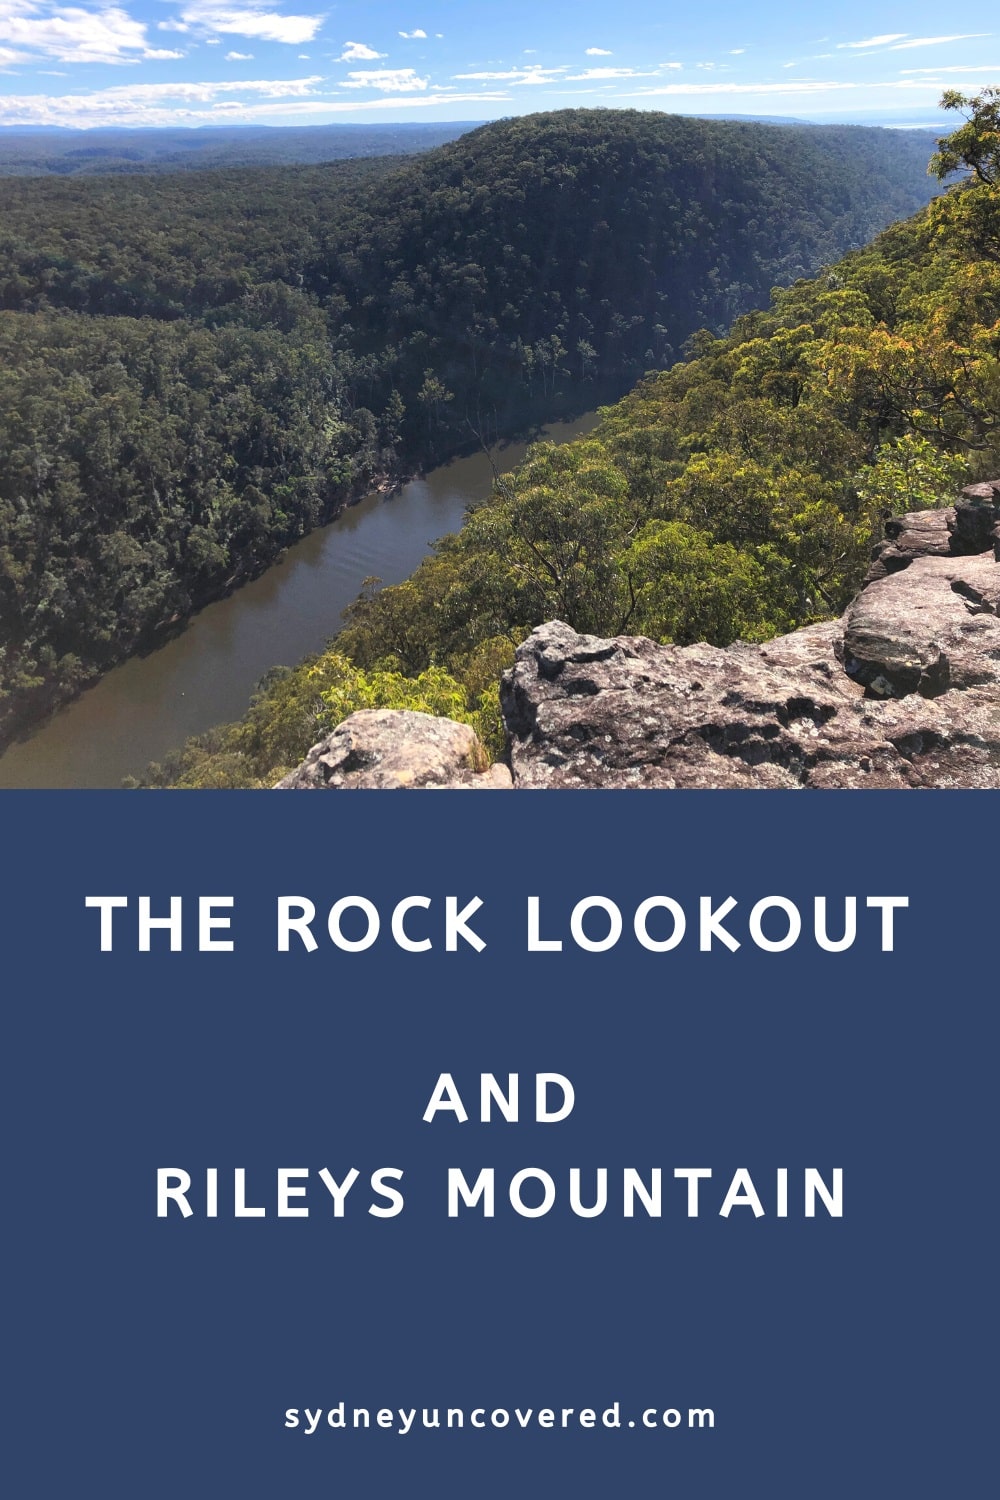 The Rock Lookout and Rileys Mountain